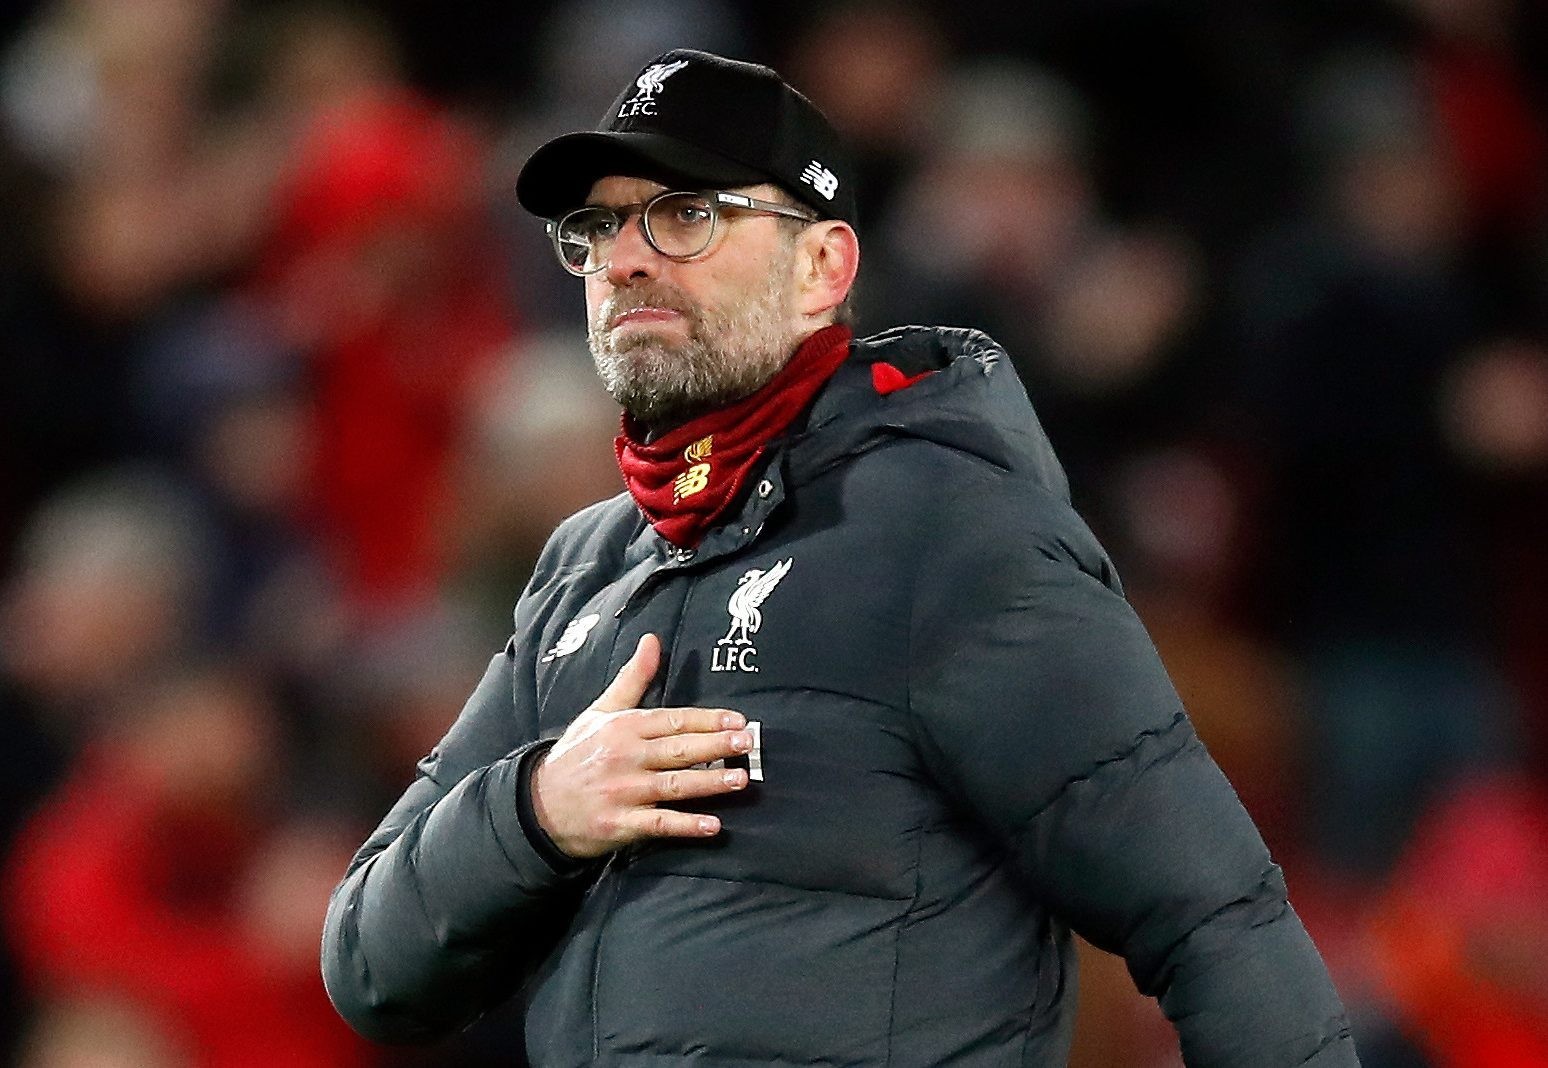 With Liverpool 25 points clear at the top of the Premier League table, biss Jurgen Klopp still does not know for sure if they will be able to win their first title for 30 years